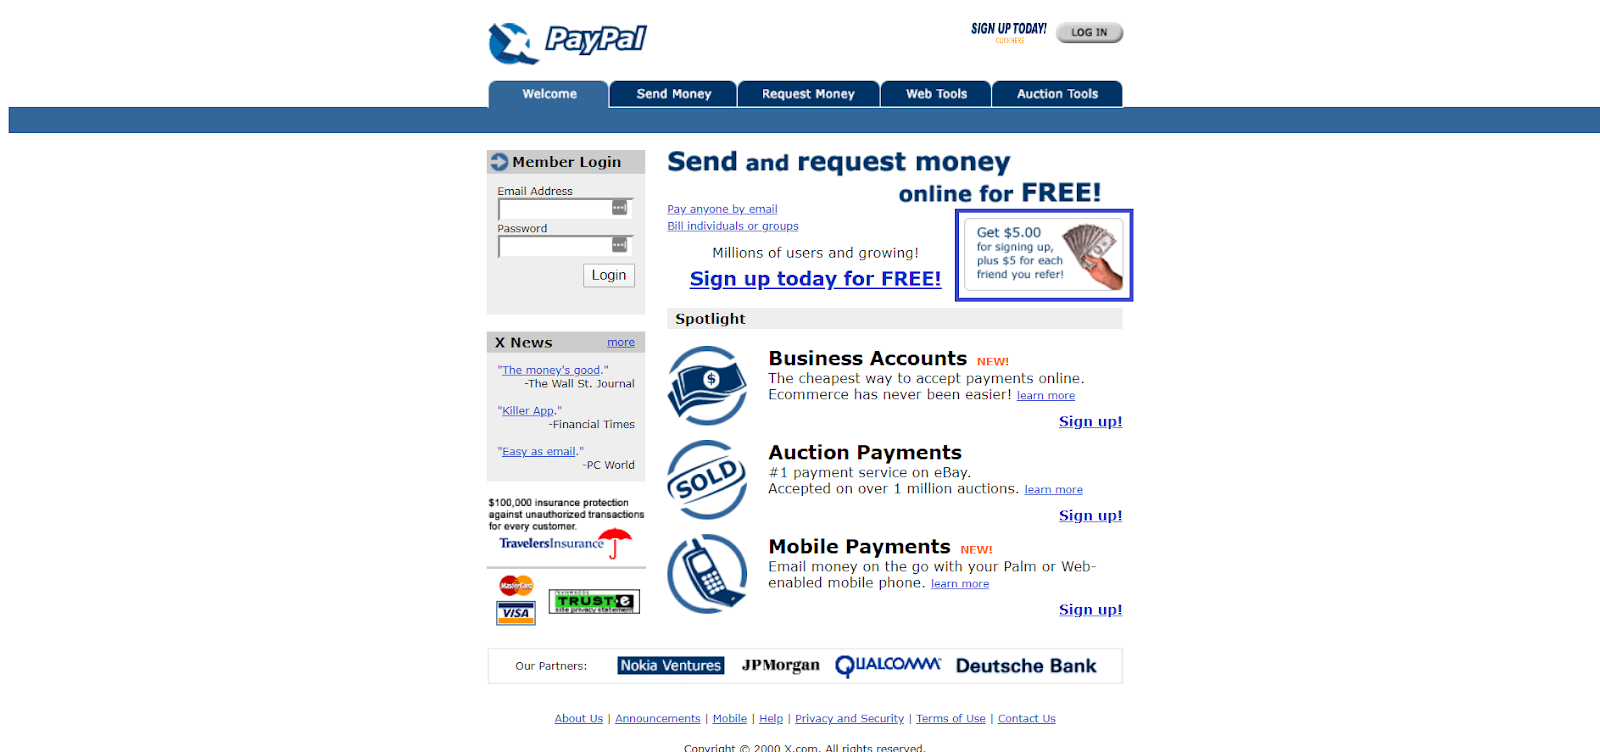 PayPal homepage in 2000